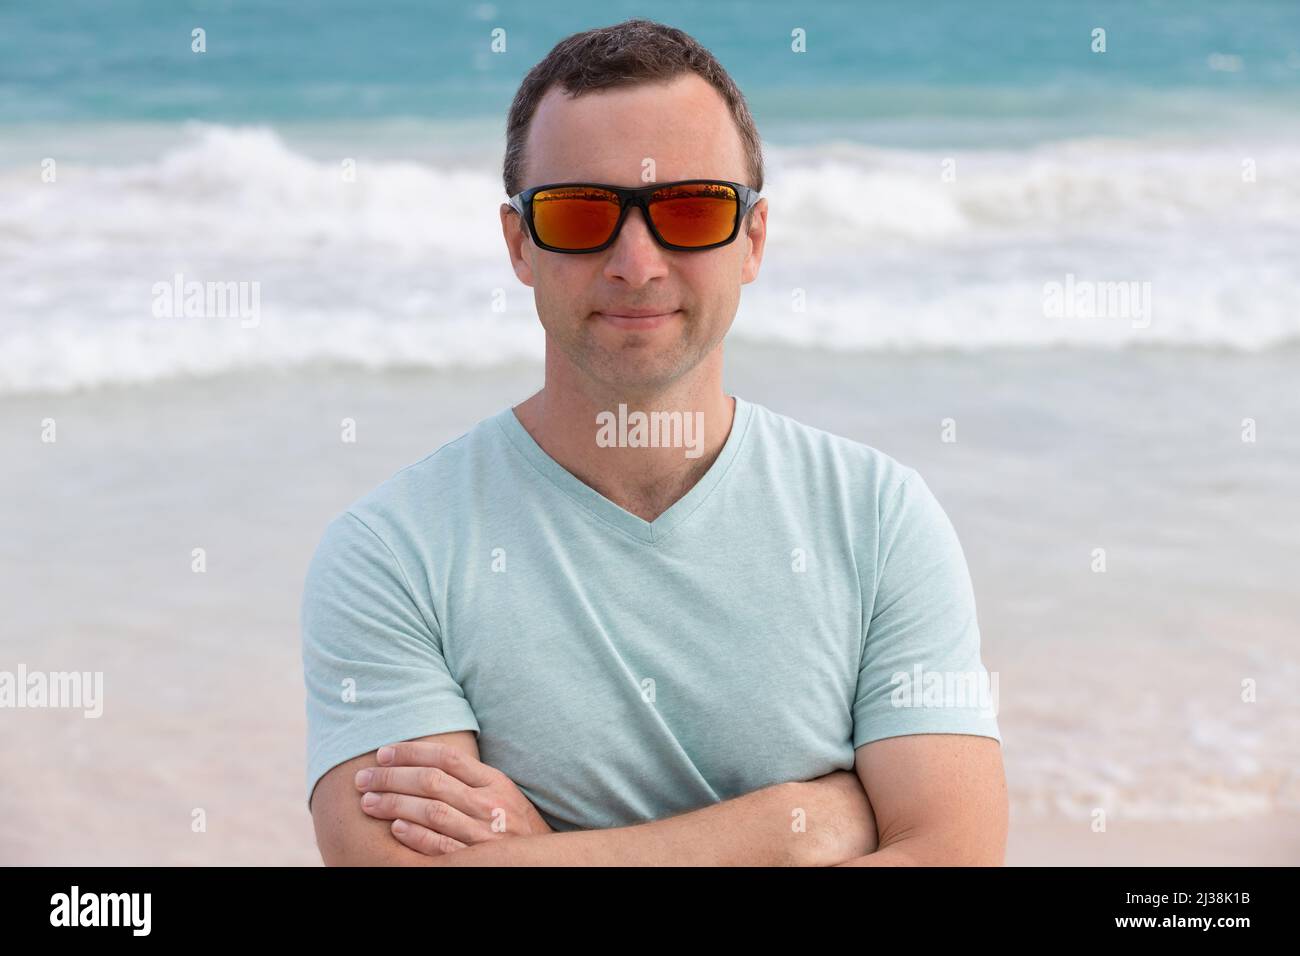 Portrait of young adult sporty smiling European man in shiny red sunglasses, outdoor photo taken on a summer beach Stock Photo